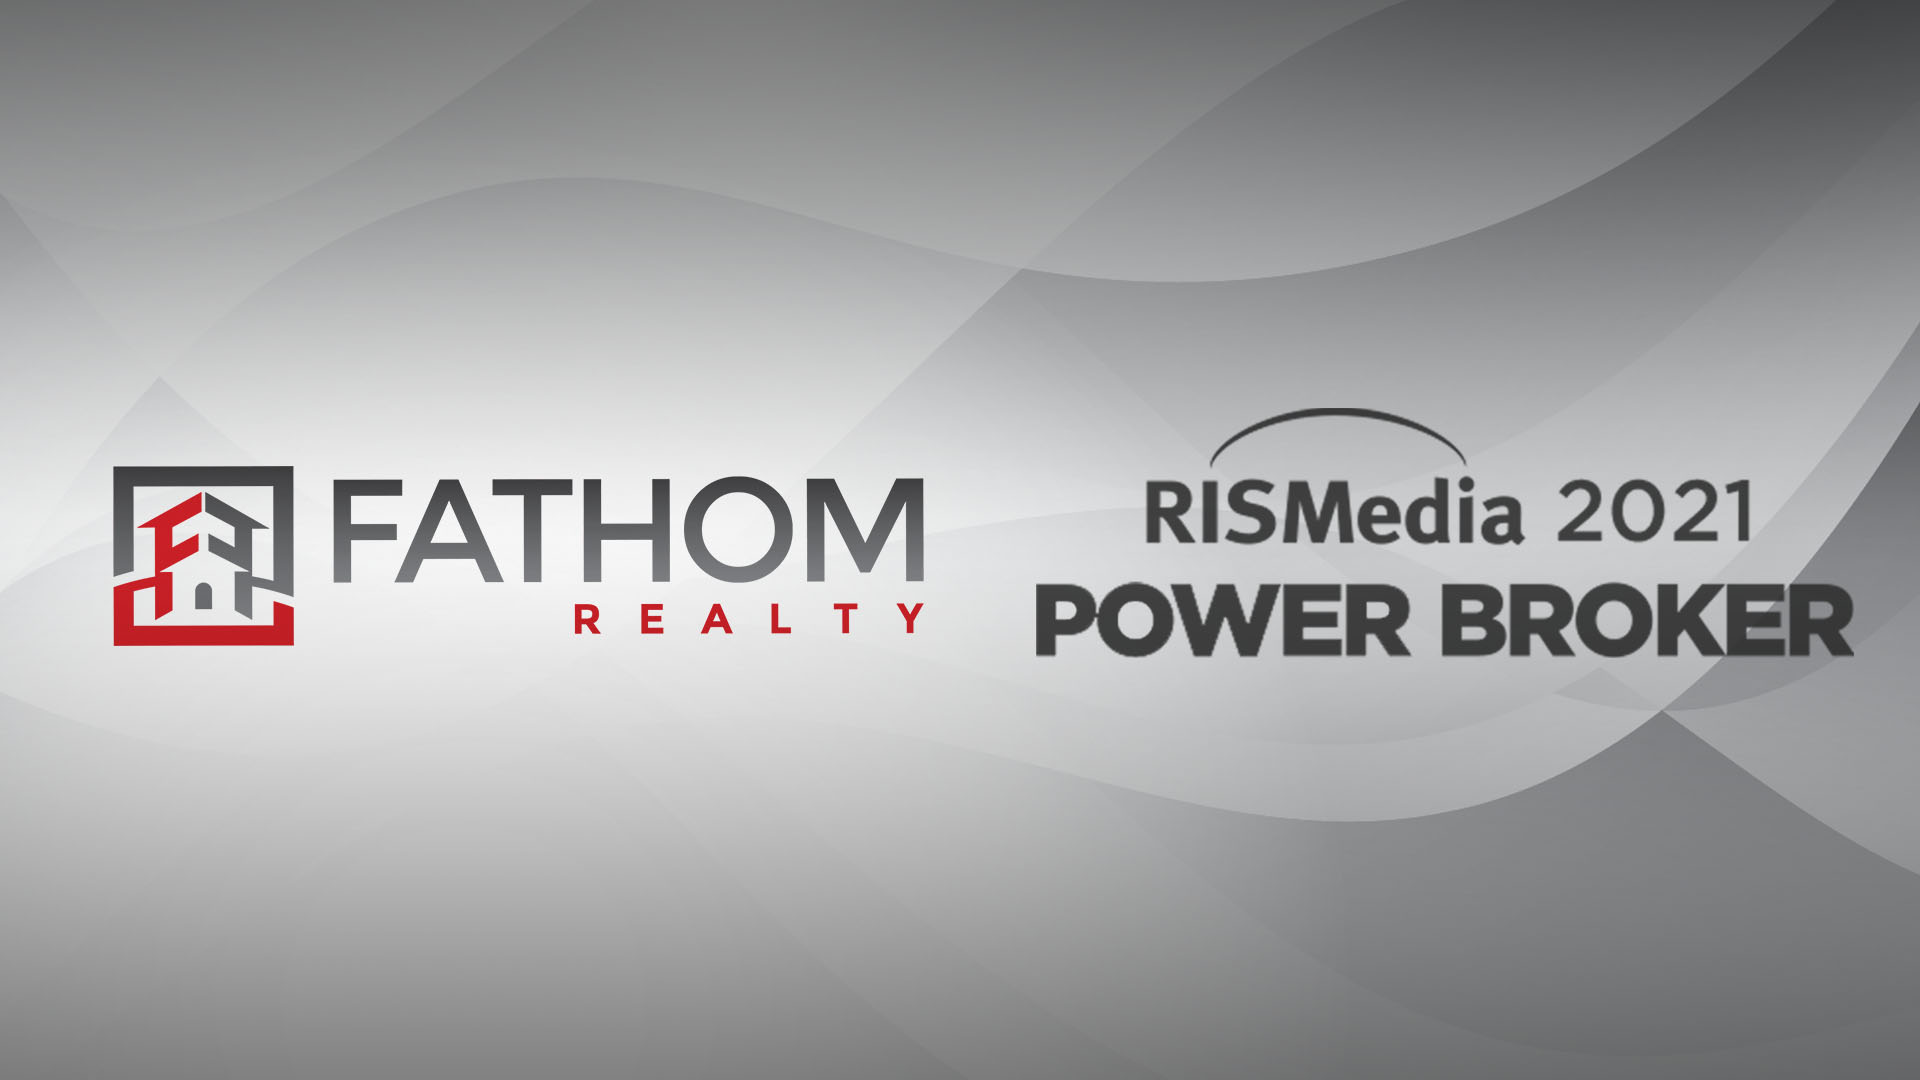 Featured image for “Fathom Rankings High in Power Broker Report”